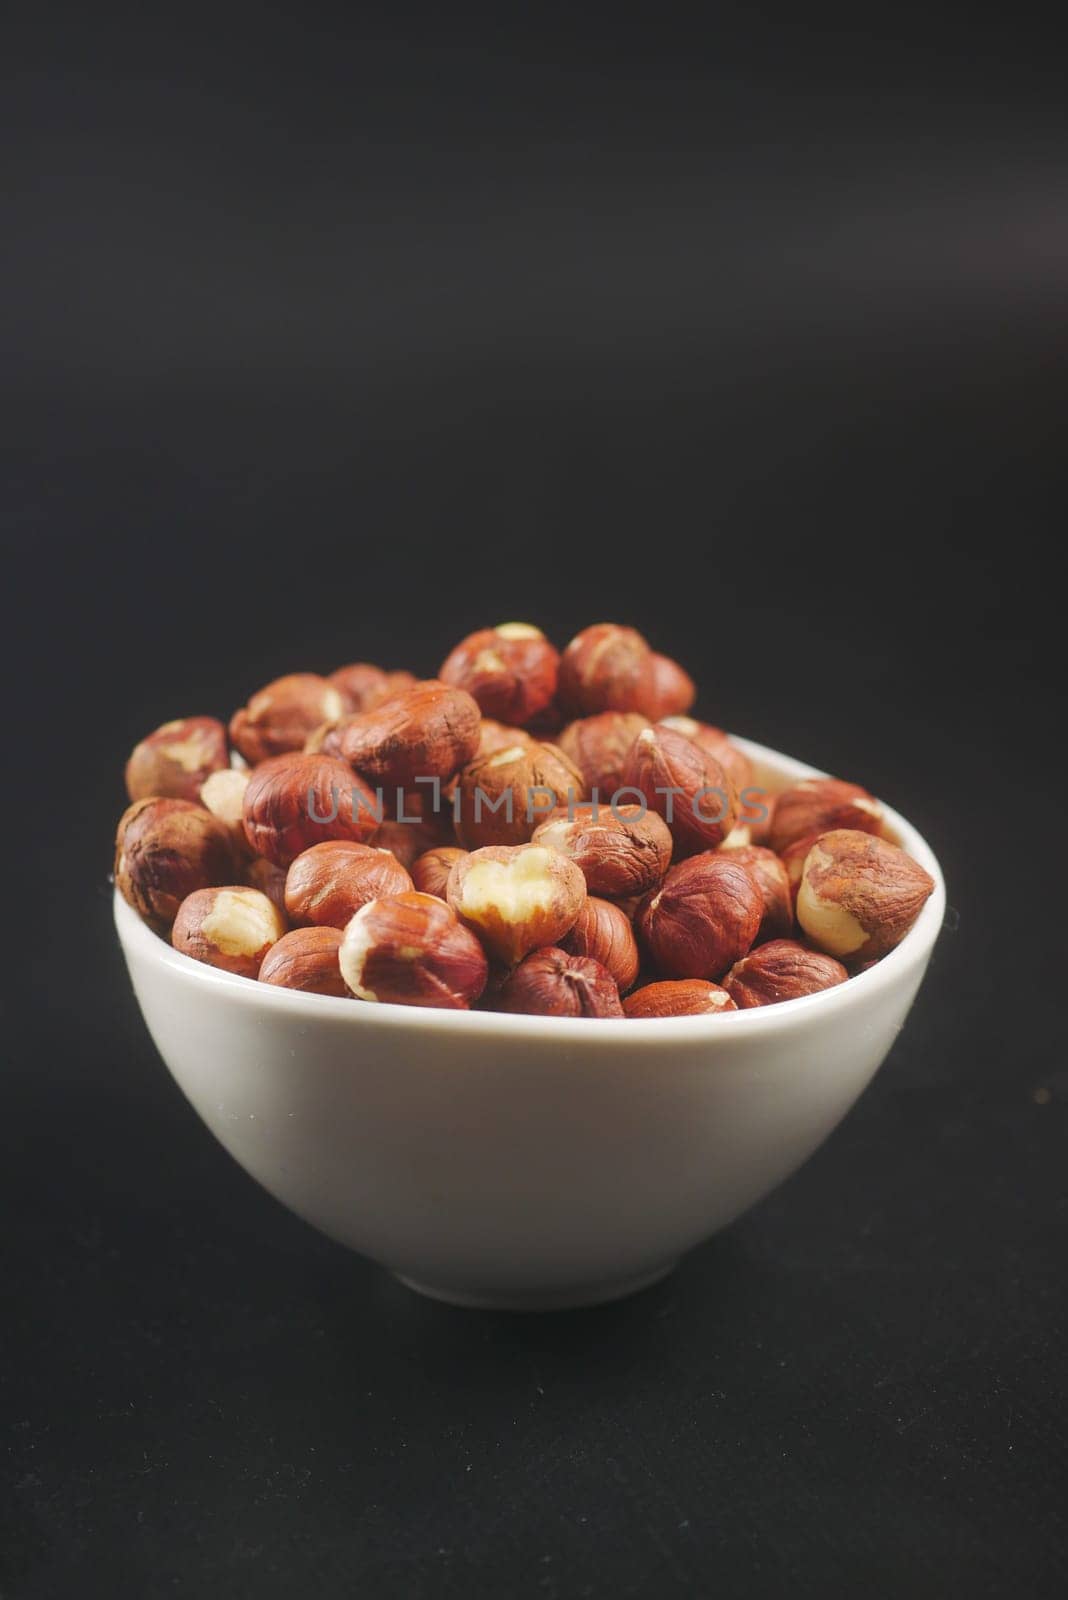 hazelnuts in a container on black background, by towfiq007